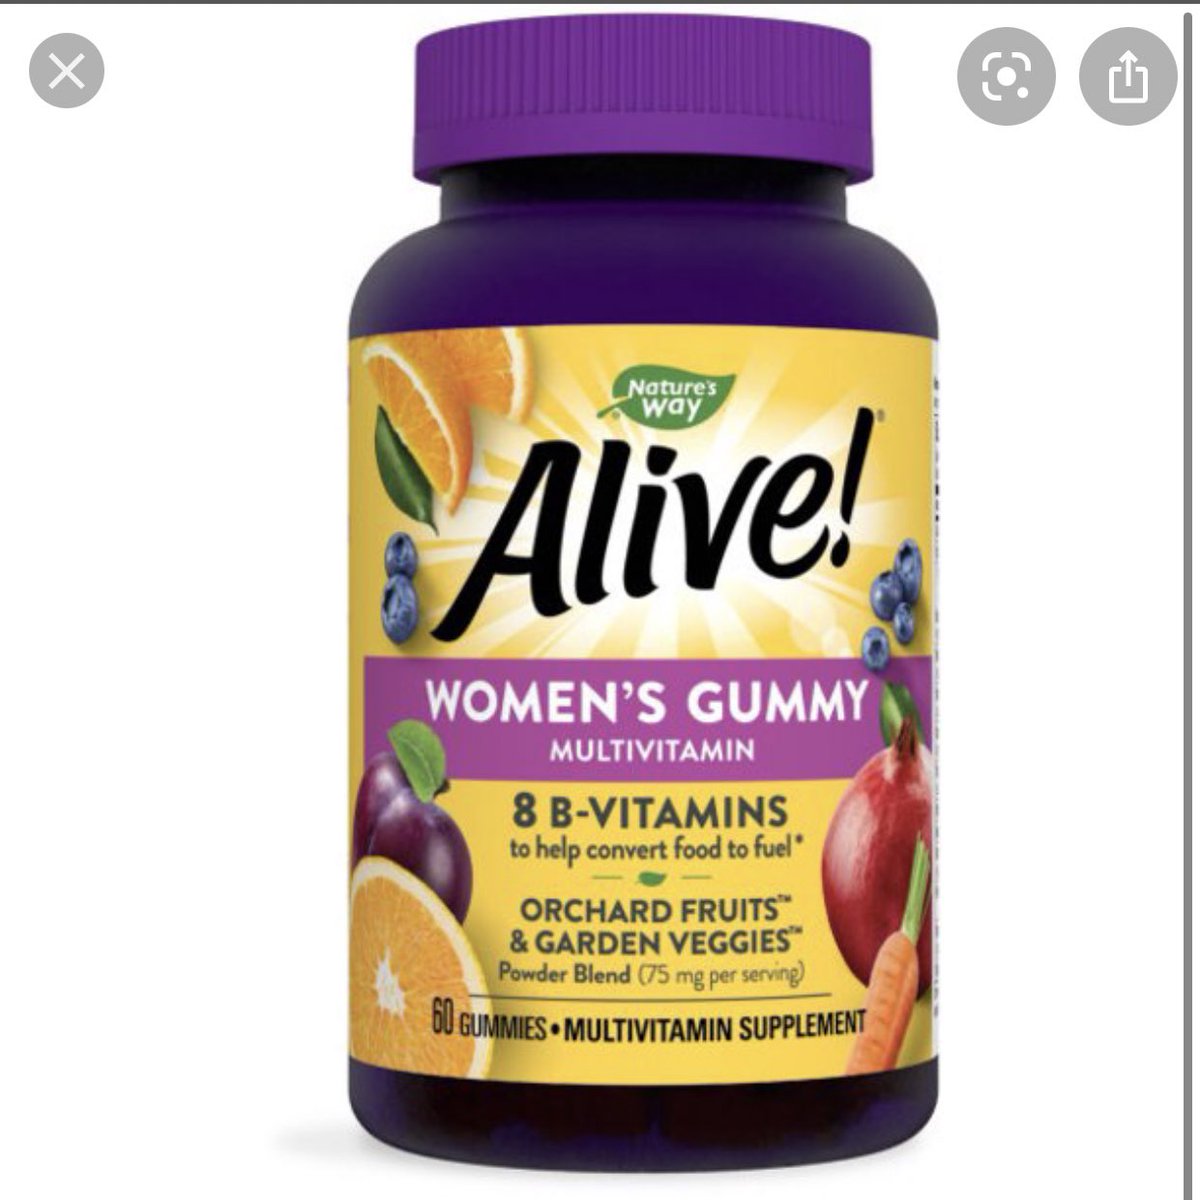 also ran out of this but its a multivitamin gummy